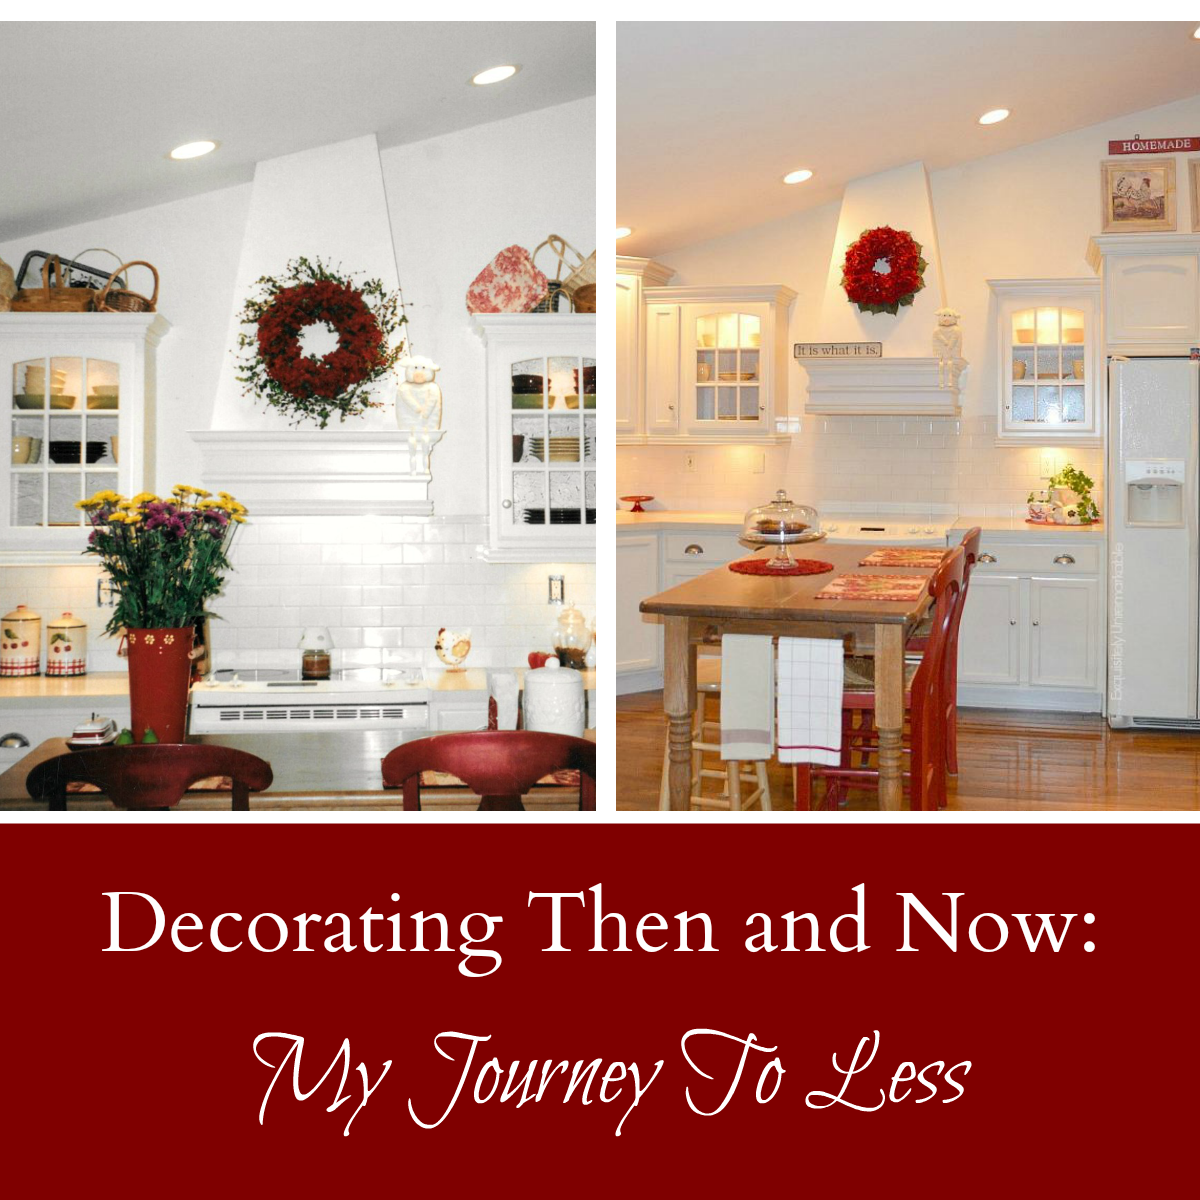 Decorating Then and Now: My Journey To Less